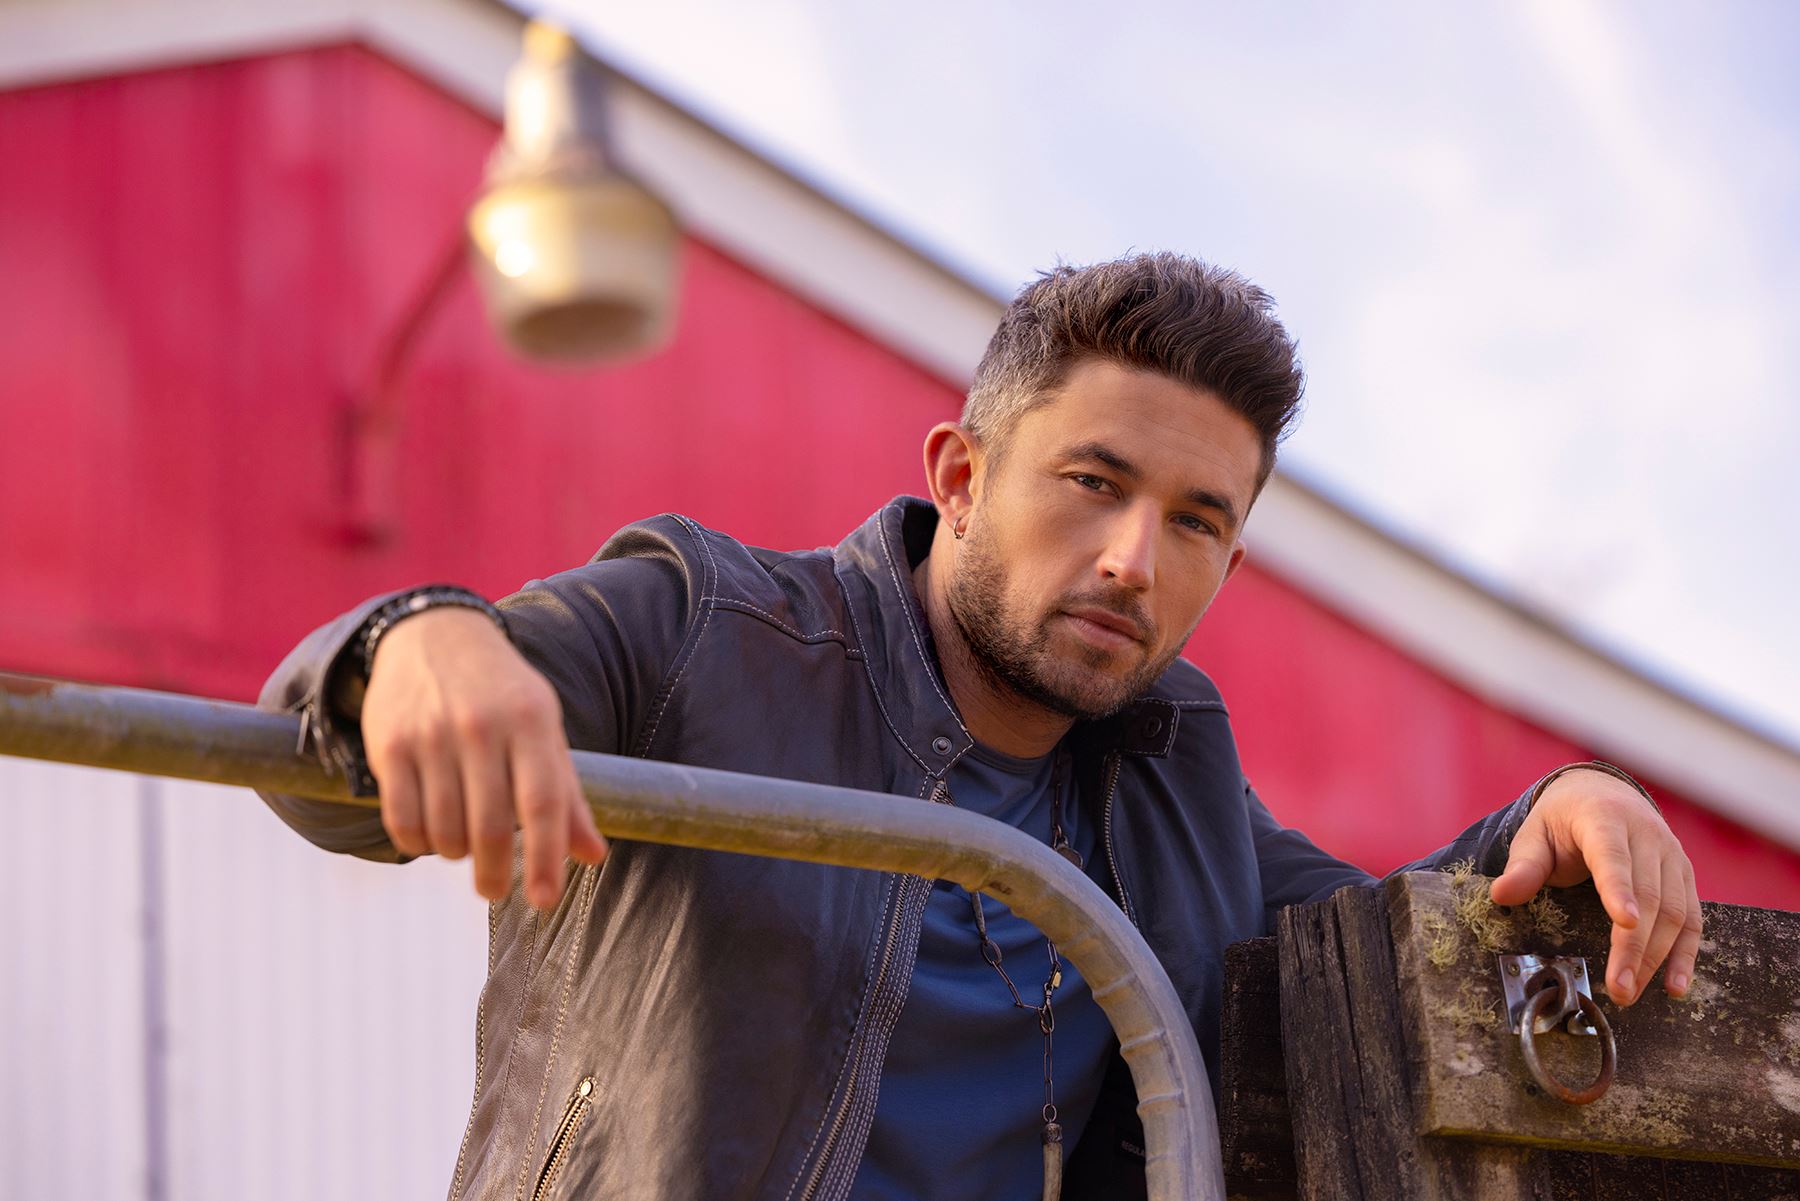 Saturday Concert ONLY - Michael Ray